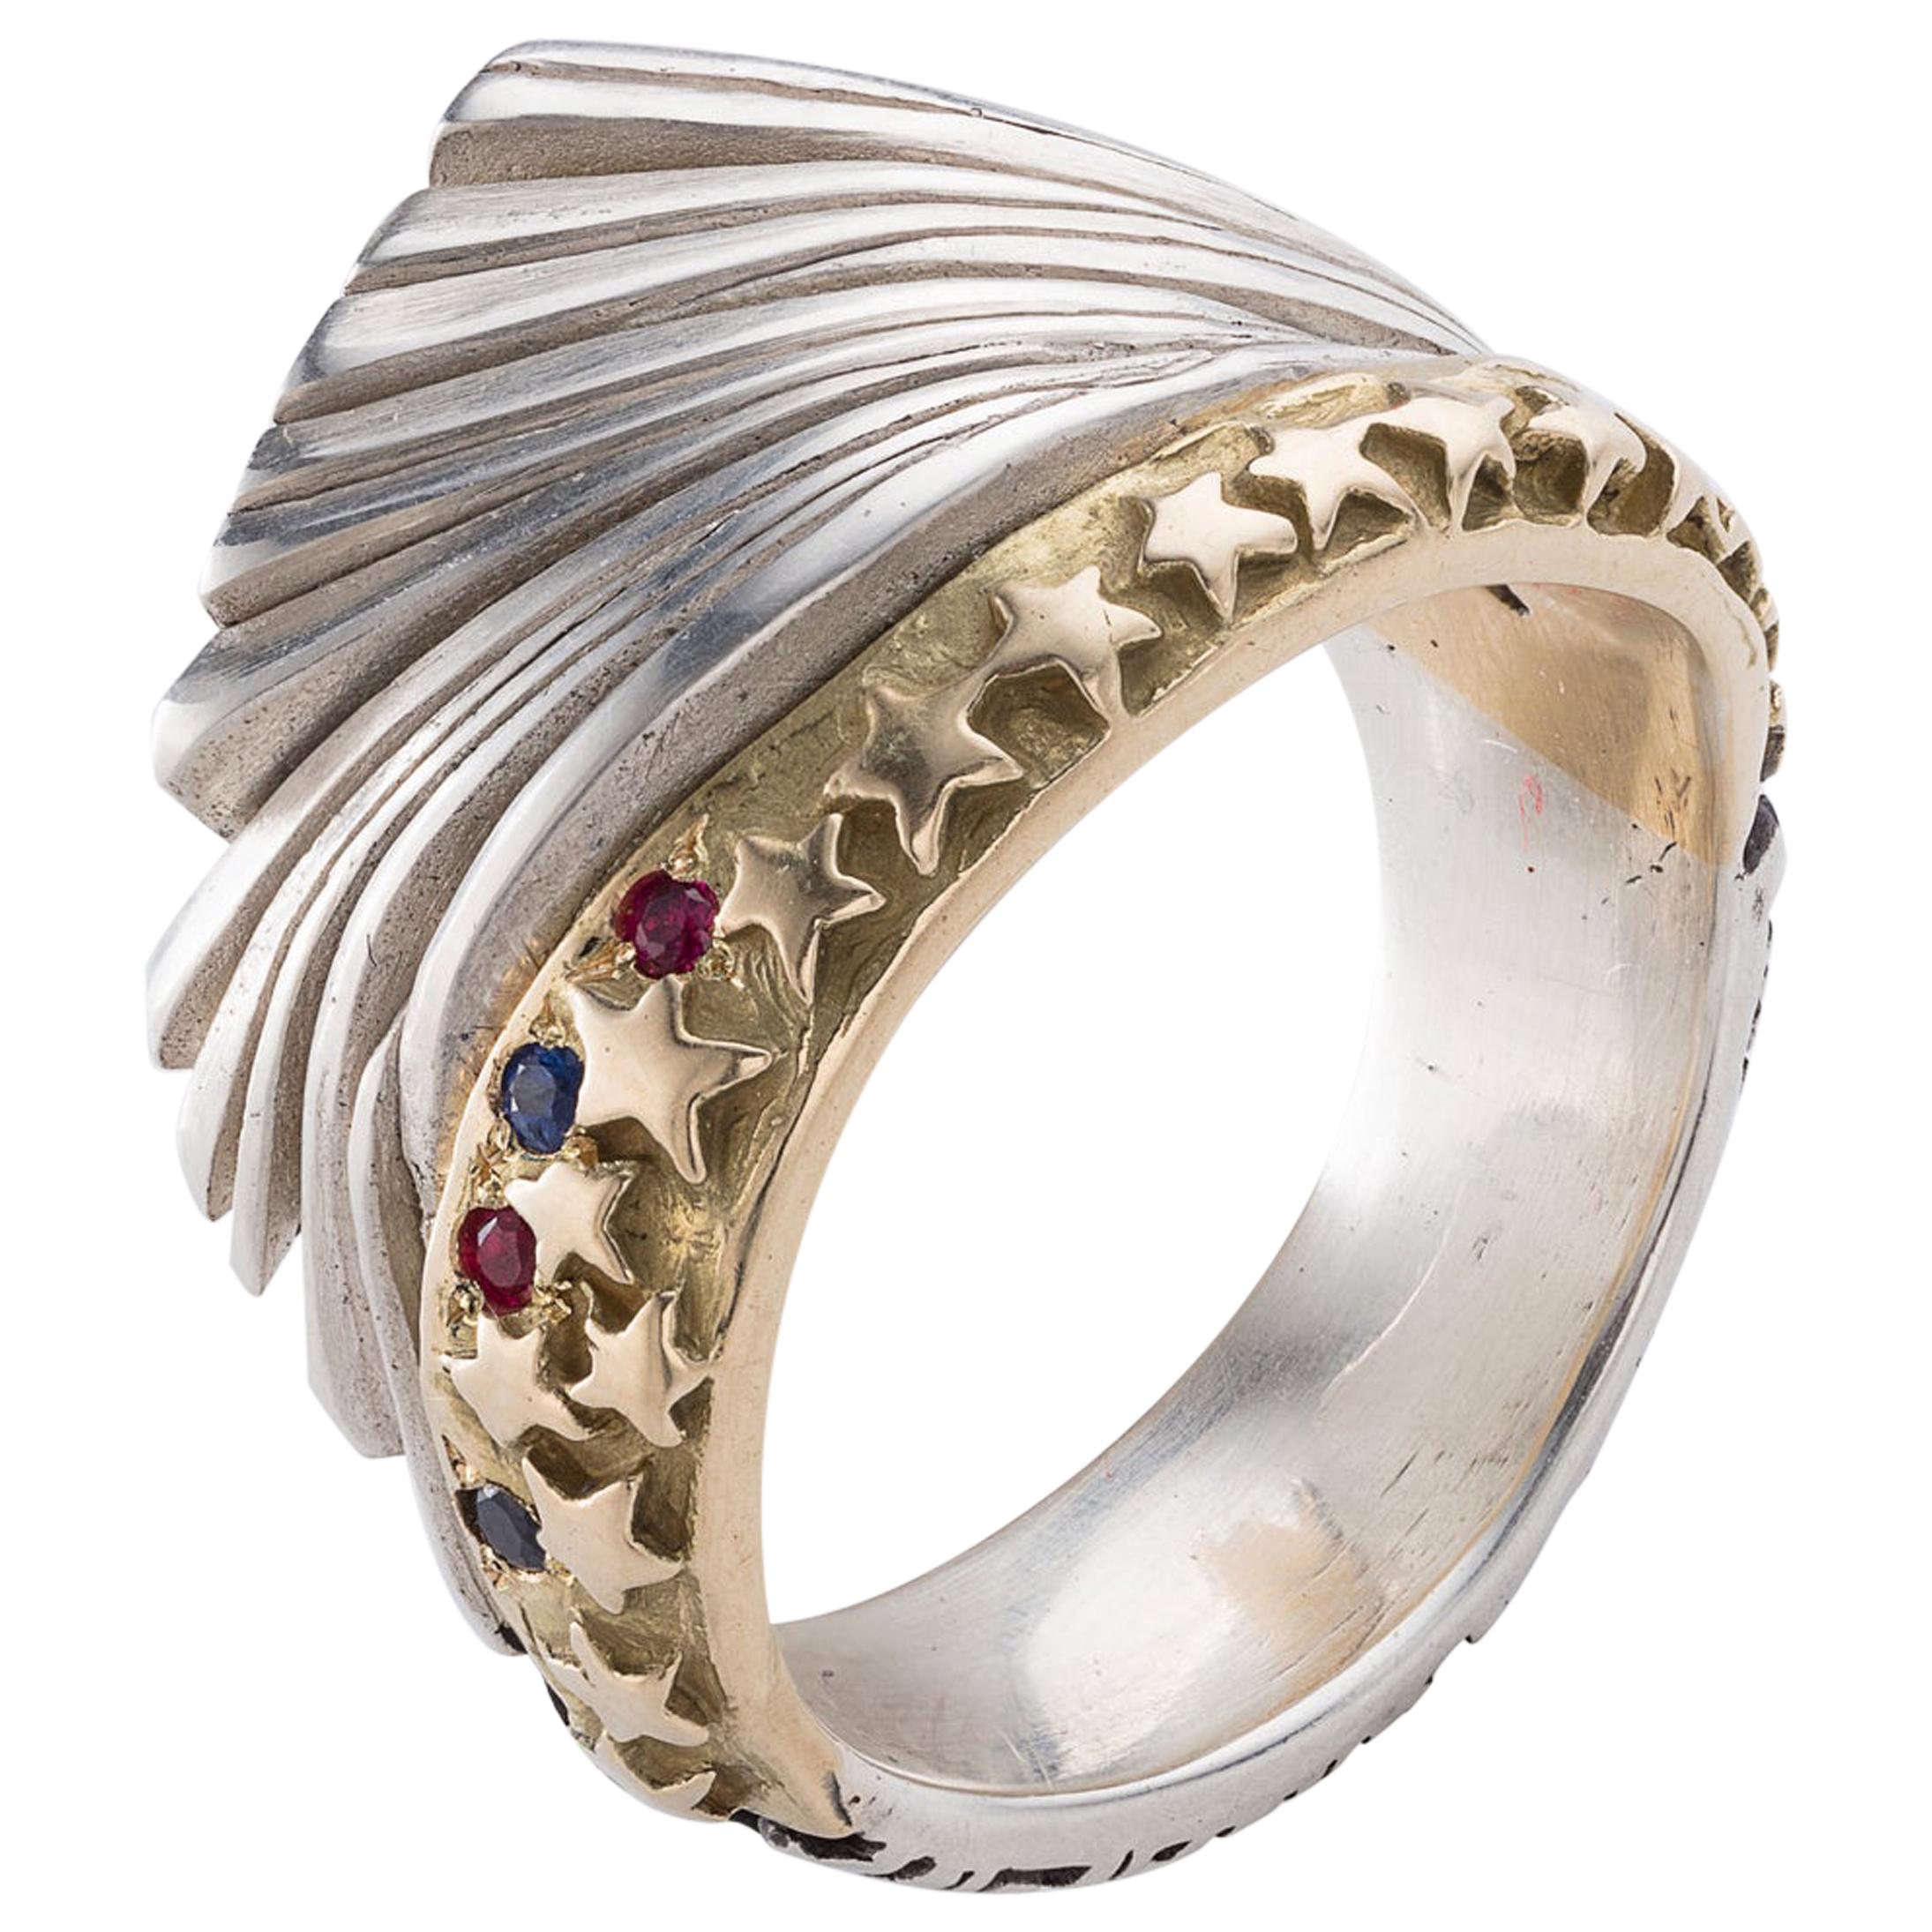 Ring in Sterling Silver, Gold, Rubies, and Sapphires by Anne Fischer, 2017